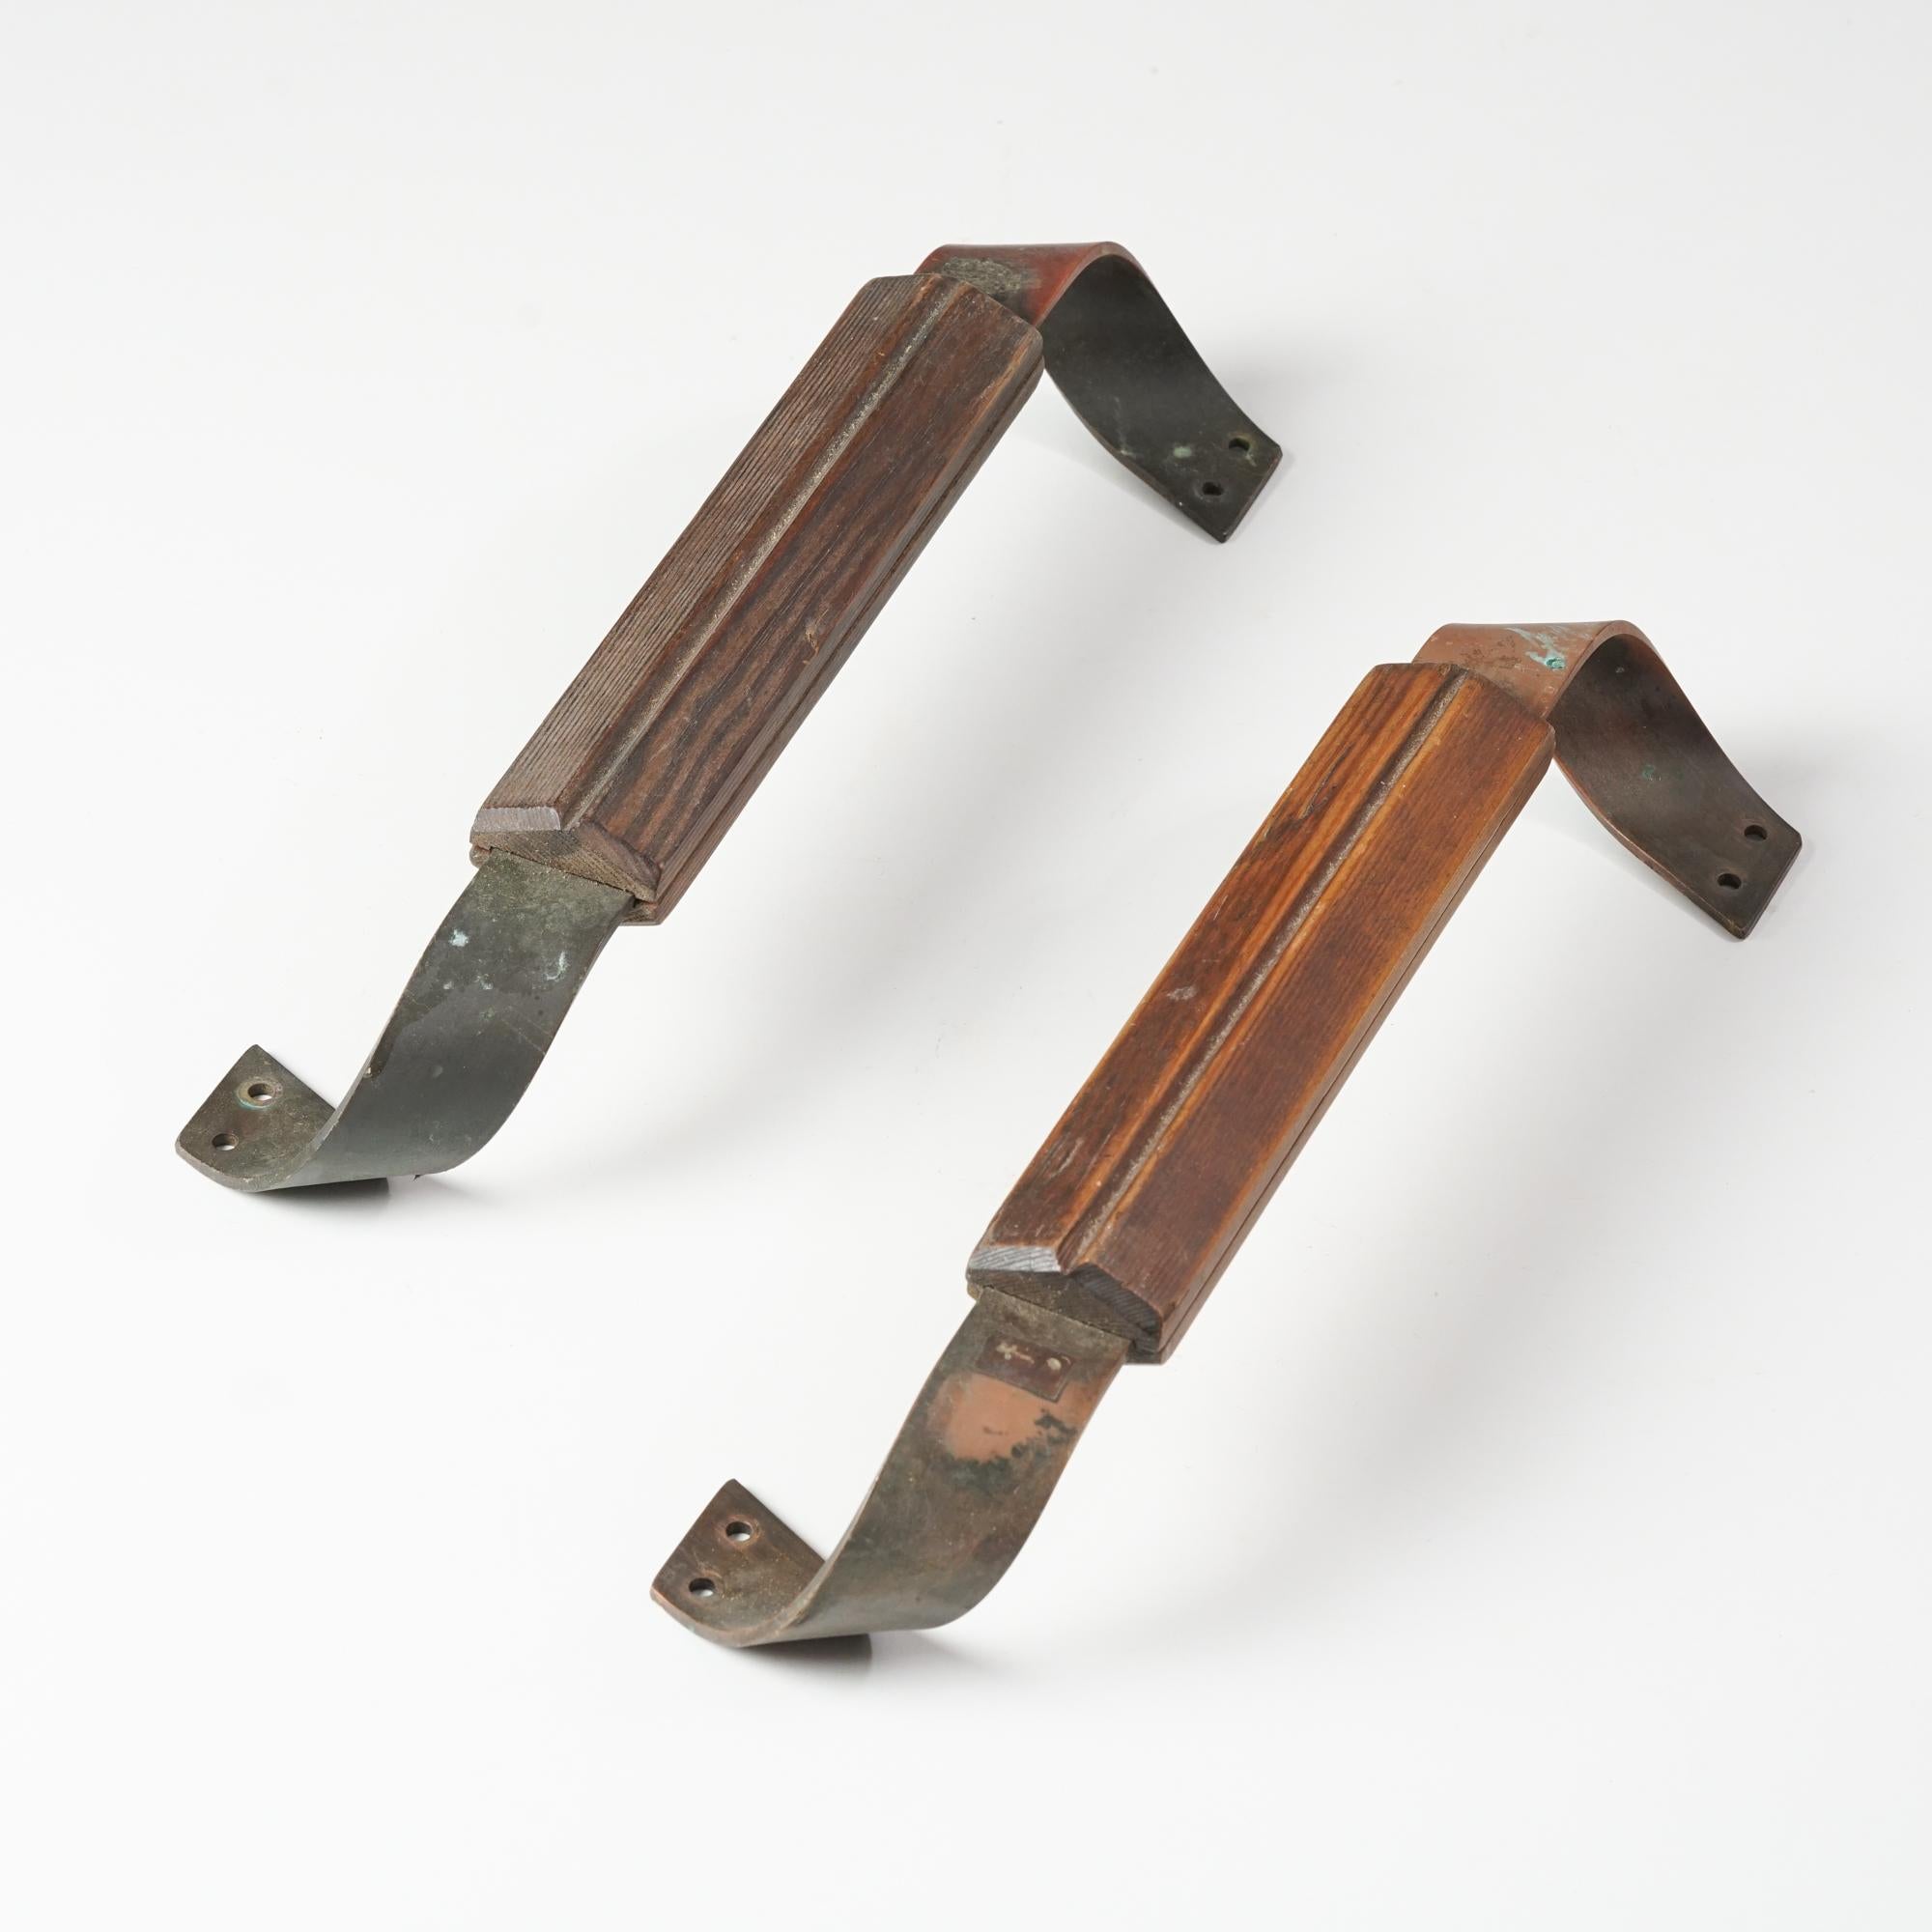 Finnish copper and pine door handles from the 1930s. Reminiscent of Alvar Aalto's design. Good vintage condition, patina and wear consistent with age and use. The handles are sold as a set. 